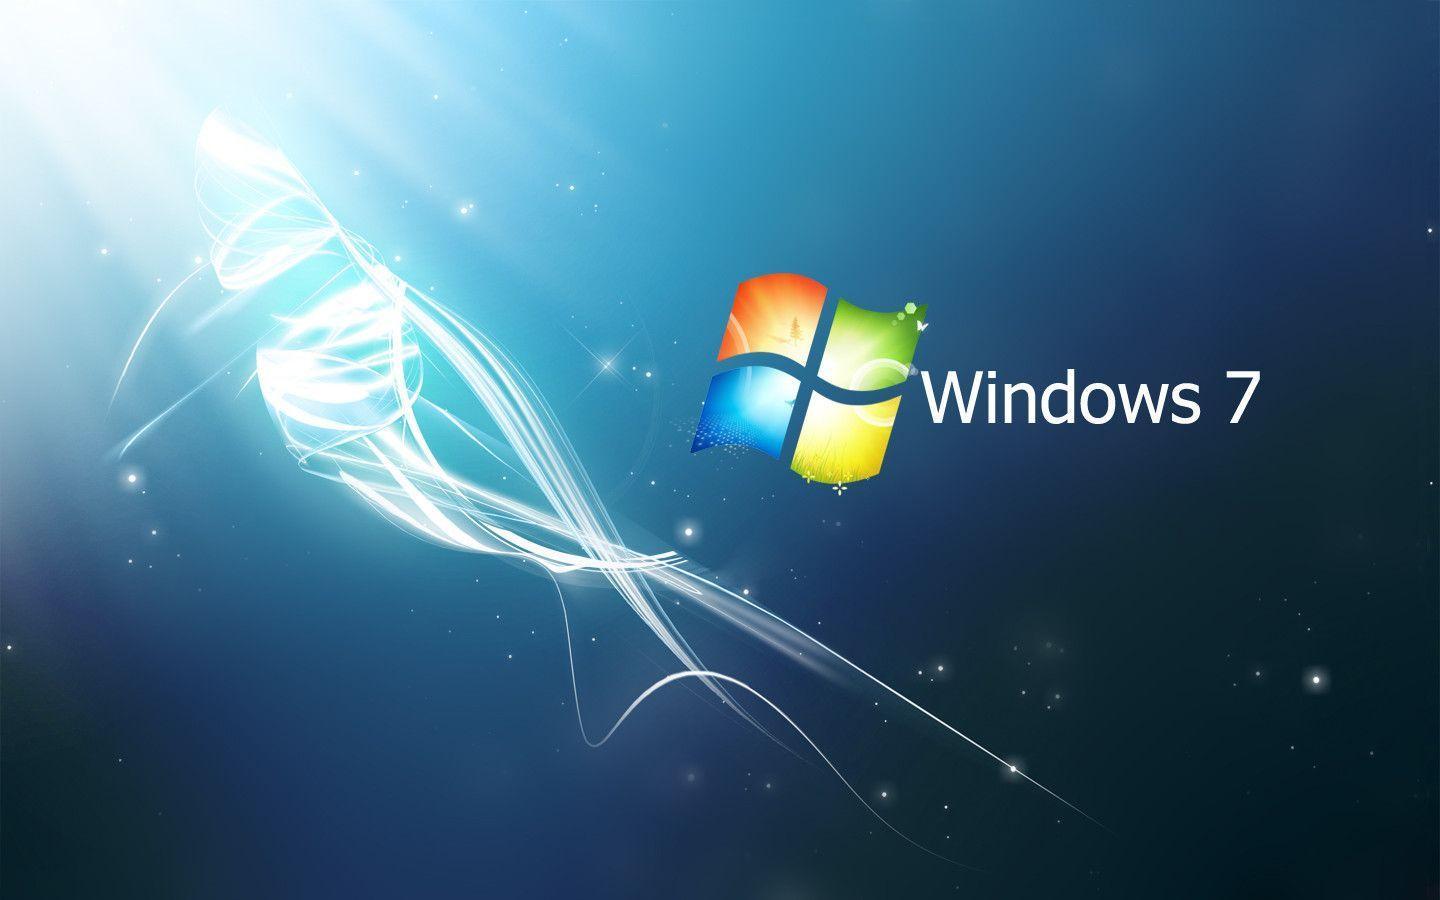 Wallpapers For > Windows 7 Wallpapers Hd Blue